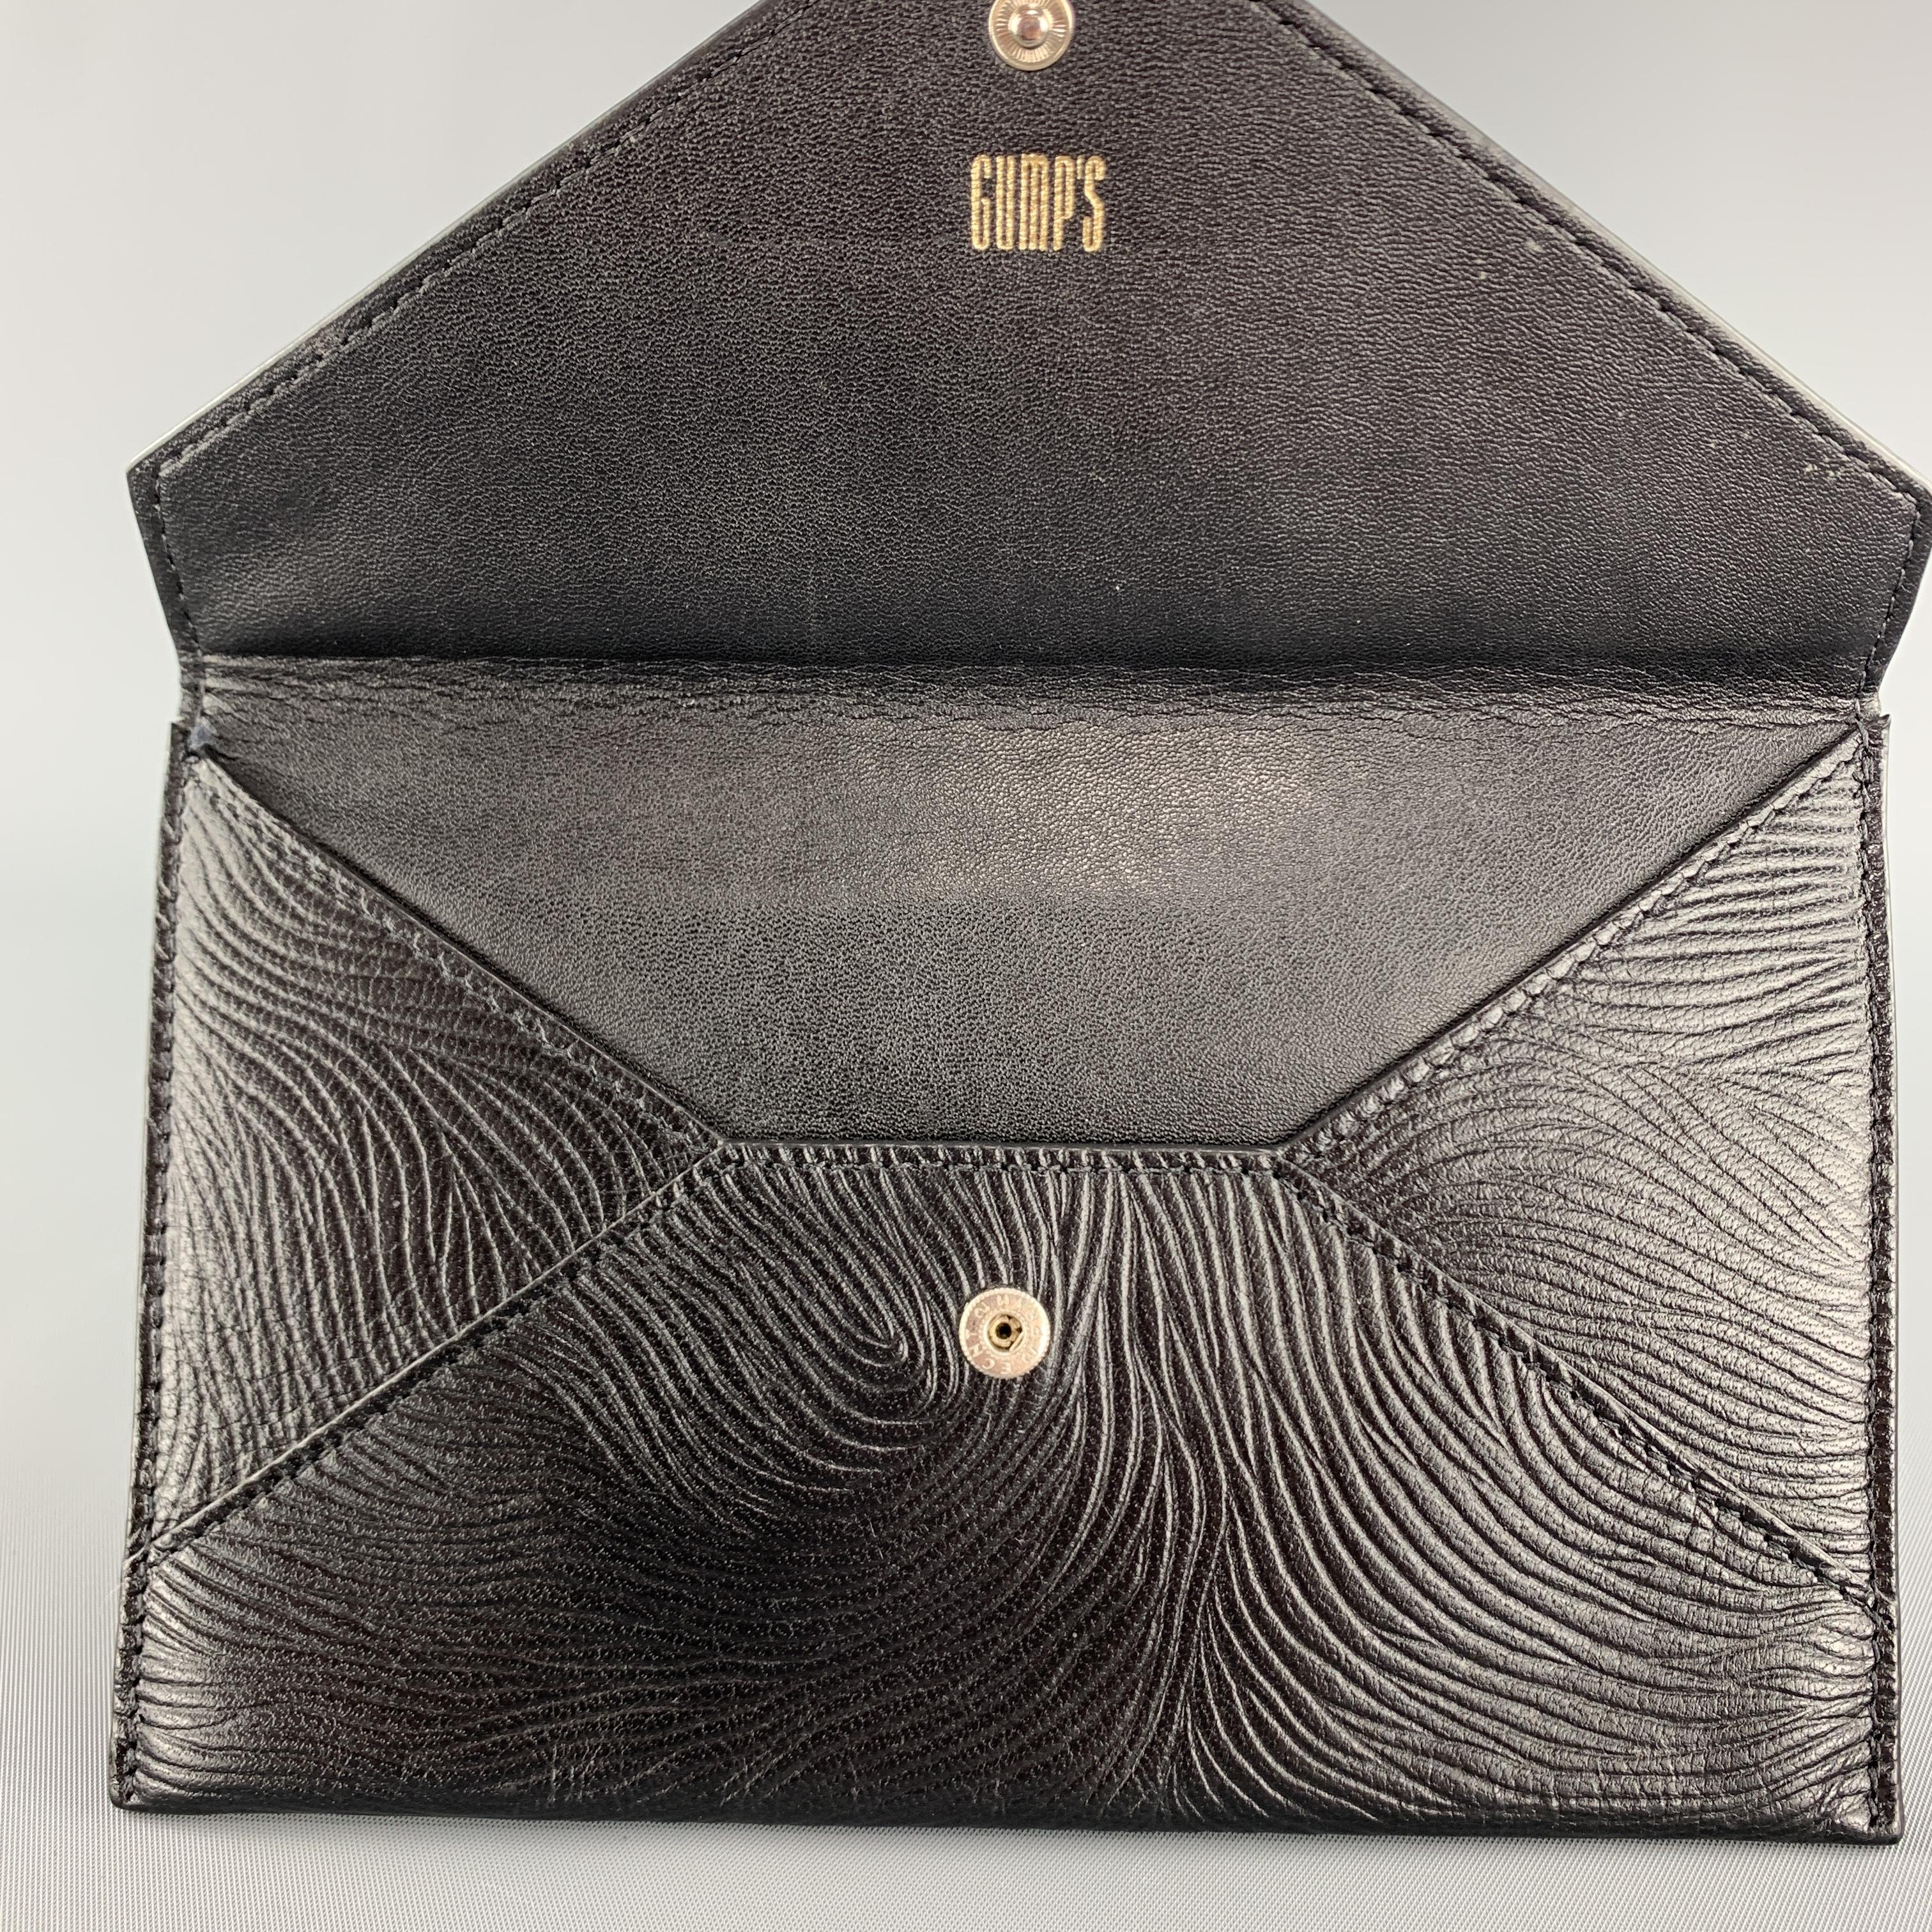 GUMP'S envelope wallet case comes in black embossed pattern leather with a snap closure. 

Excellent Pre-Owned Condition.

7.25 X 4.65 in.